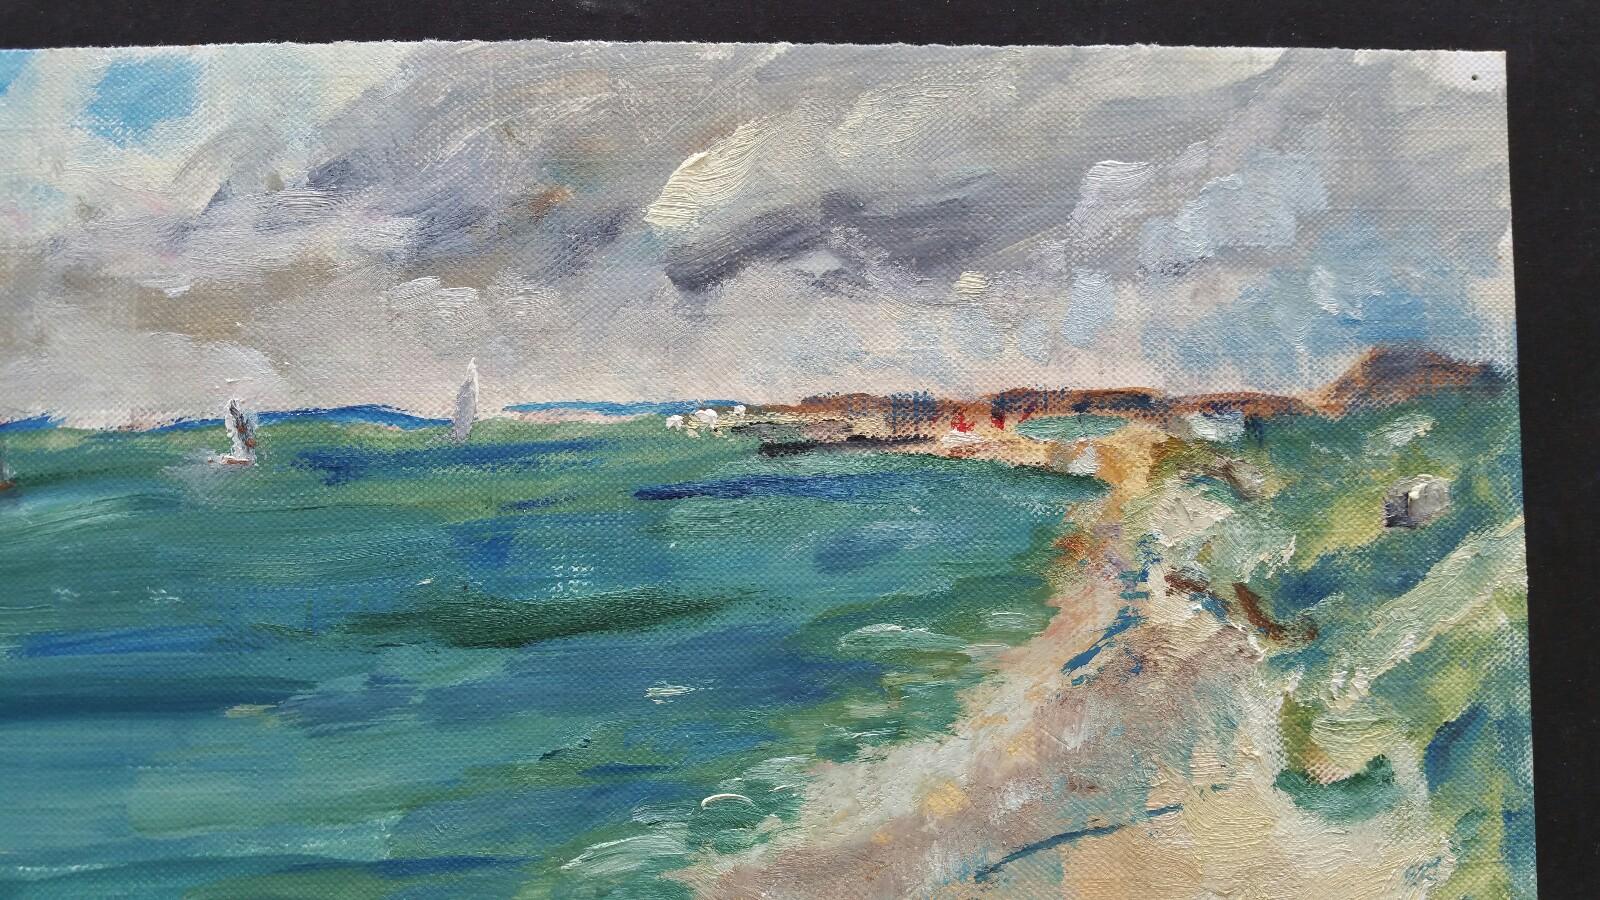 A Summer Beach
French School, mid-late 20th century
unsigned
oil painting on canvas textured paper (reverse side is smooth, the painted side looks and feels as canvas), unframed
overall 9 x 15 inches

A fine, breezy summer day in the French sun. A